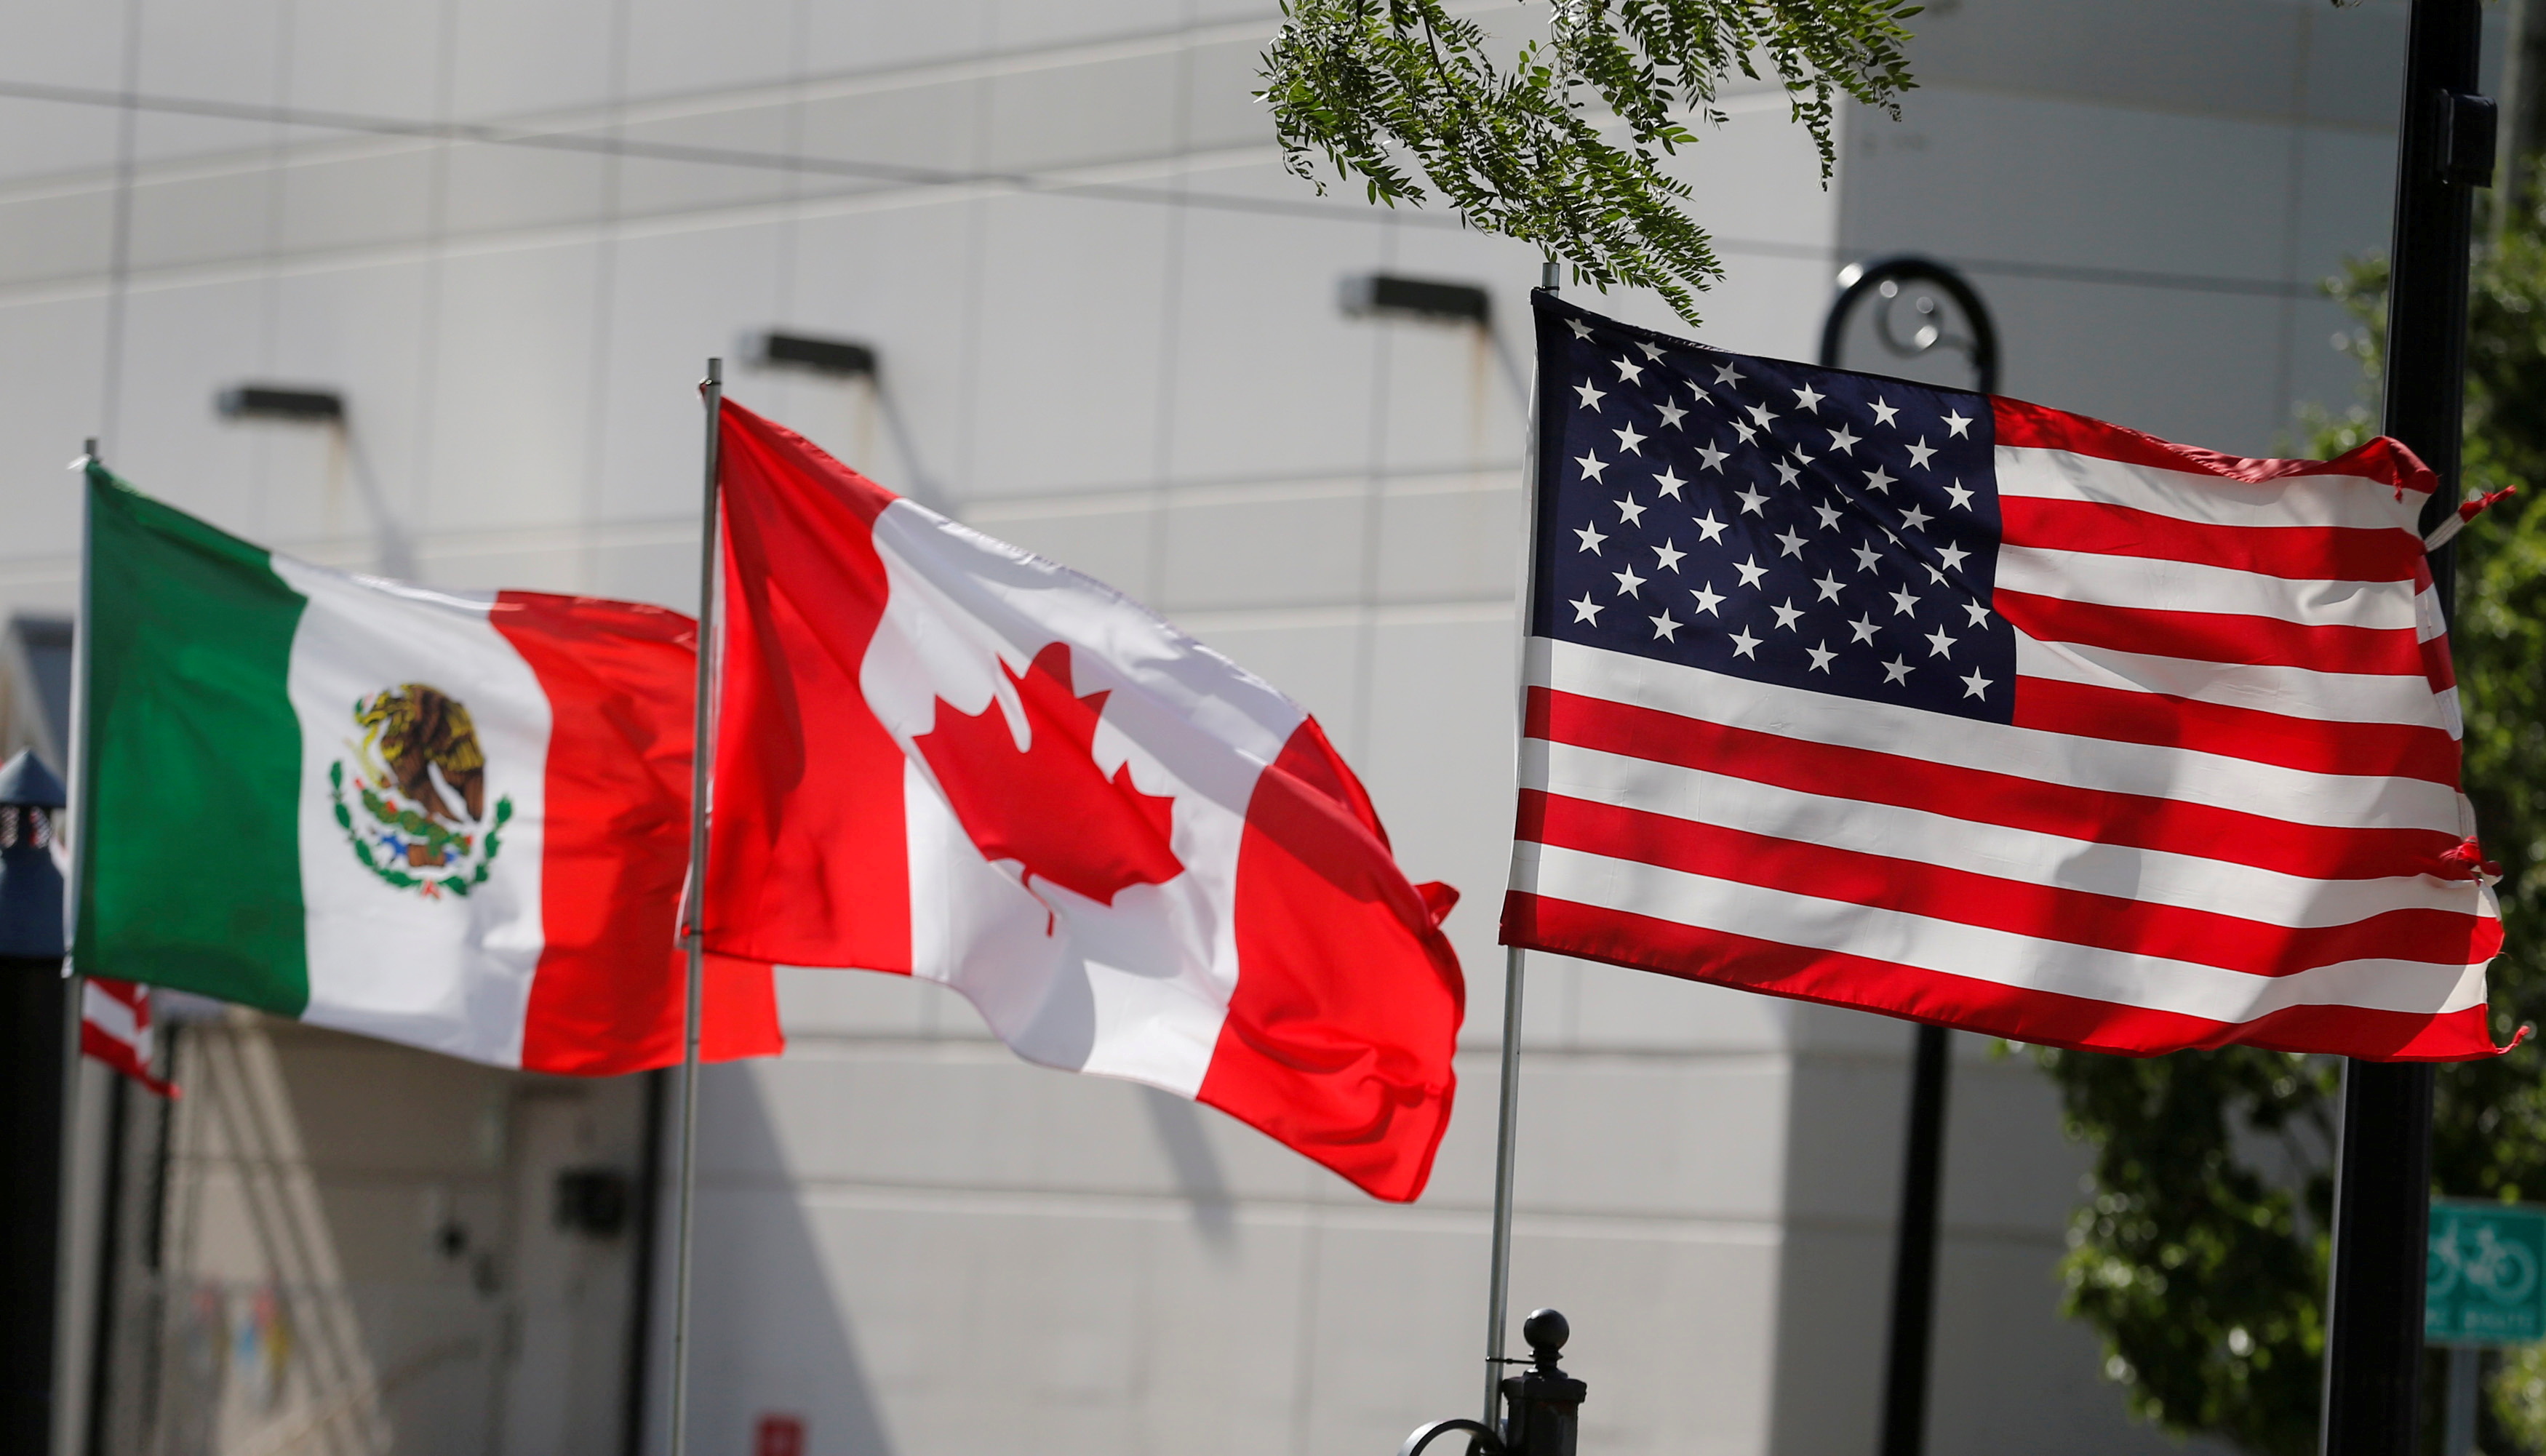 Flags of the U.S., Canada and Mexico fly next to each other in Detroit, Michigan, U.S. August 29, 2018. REUTERS/Rebecca Cook/File Photo